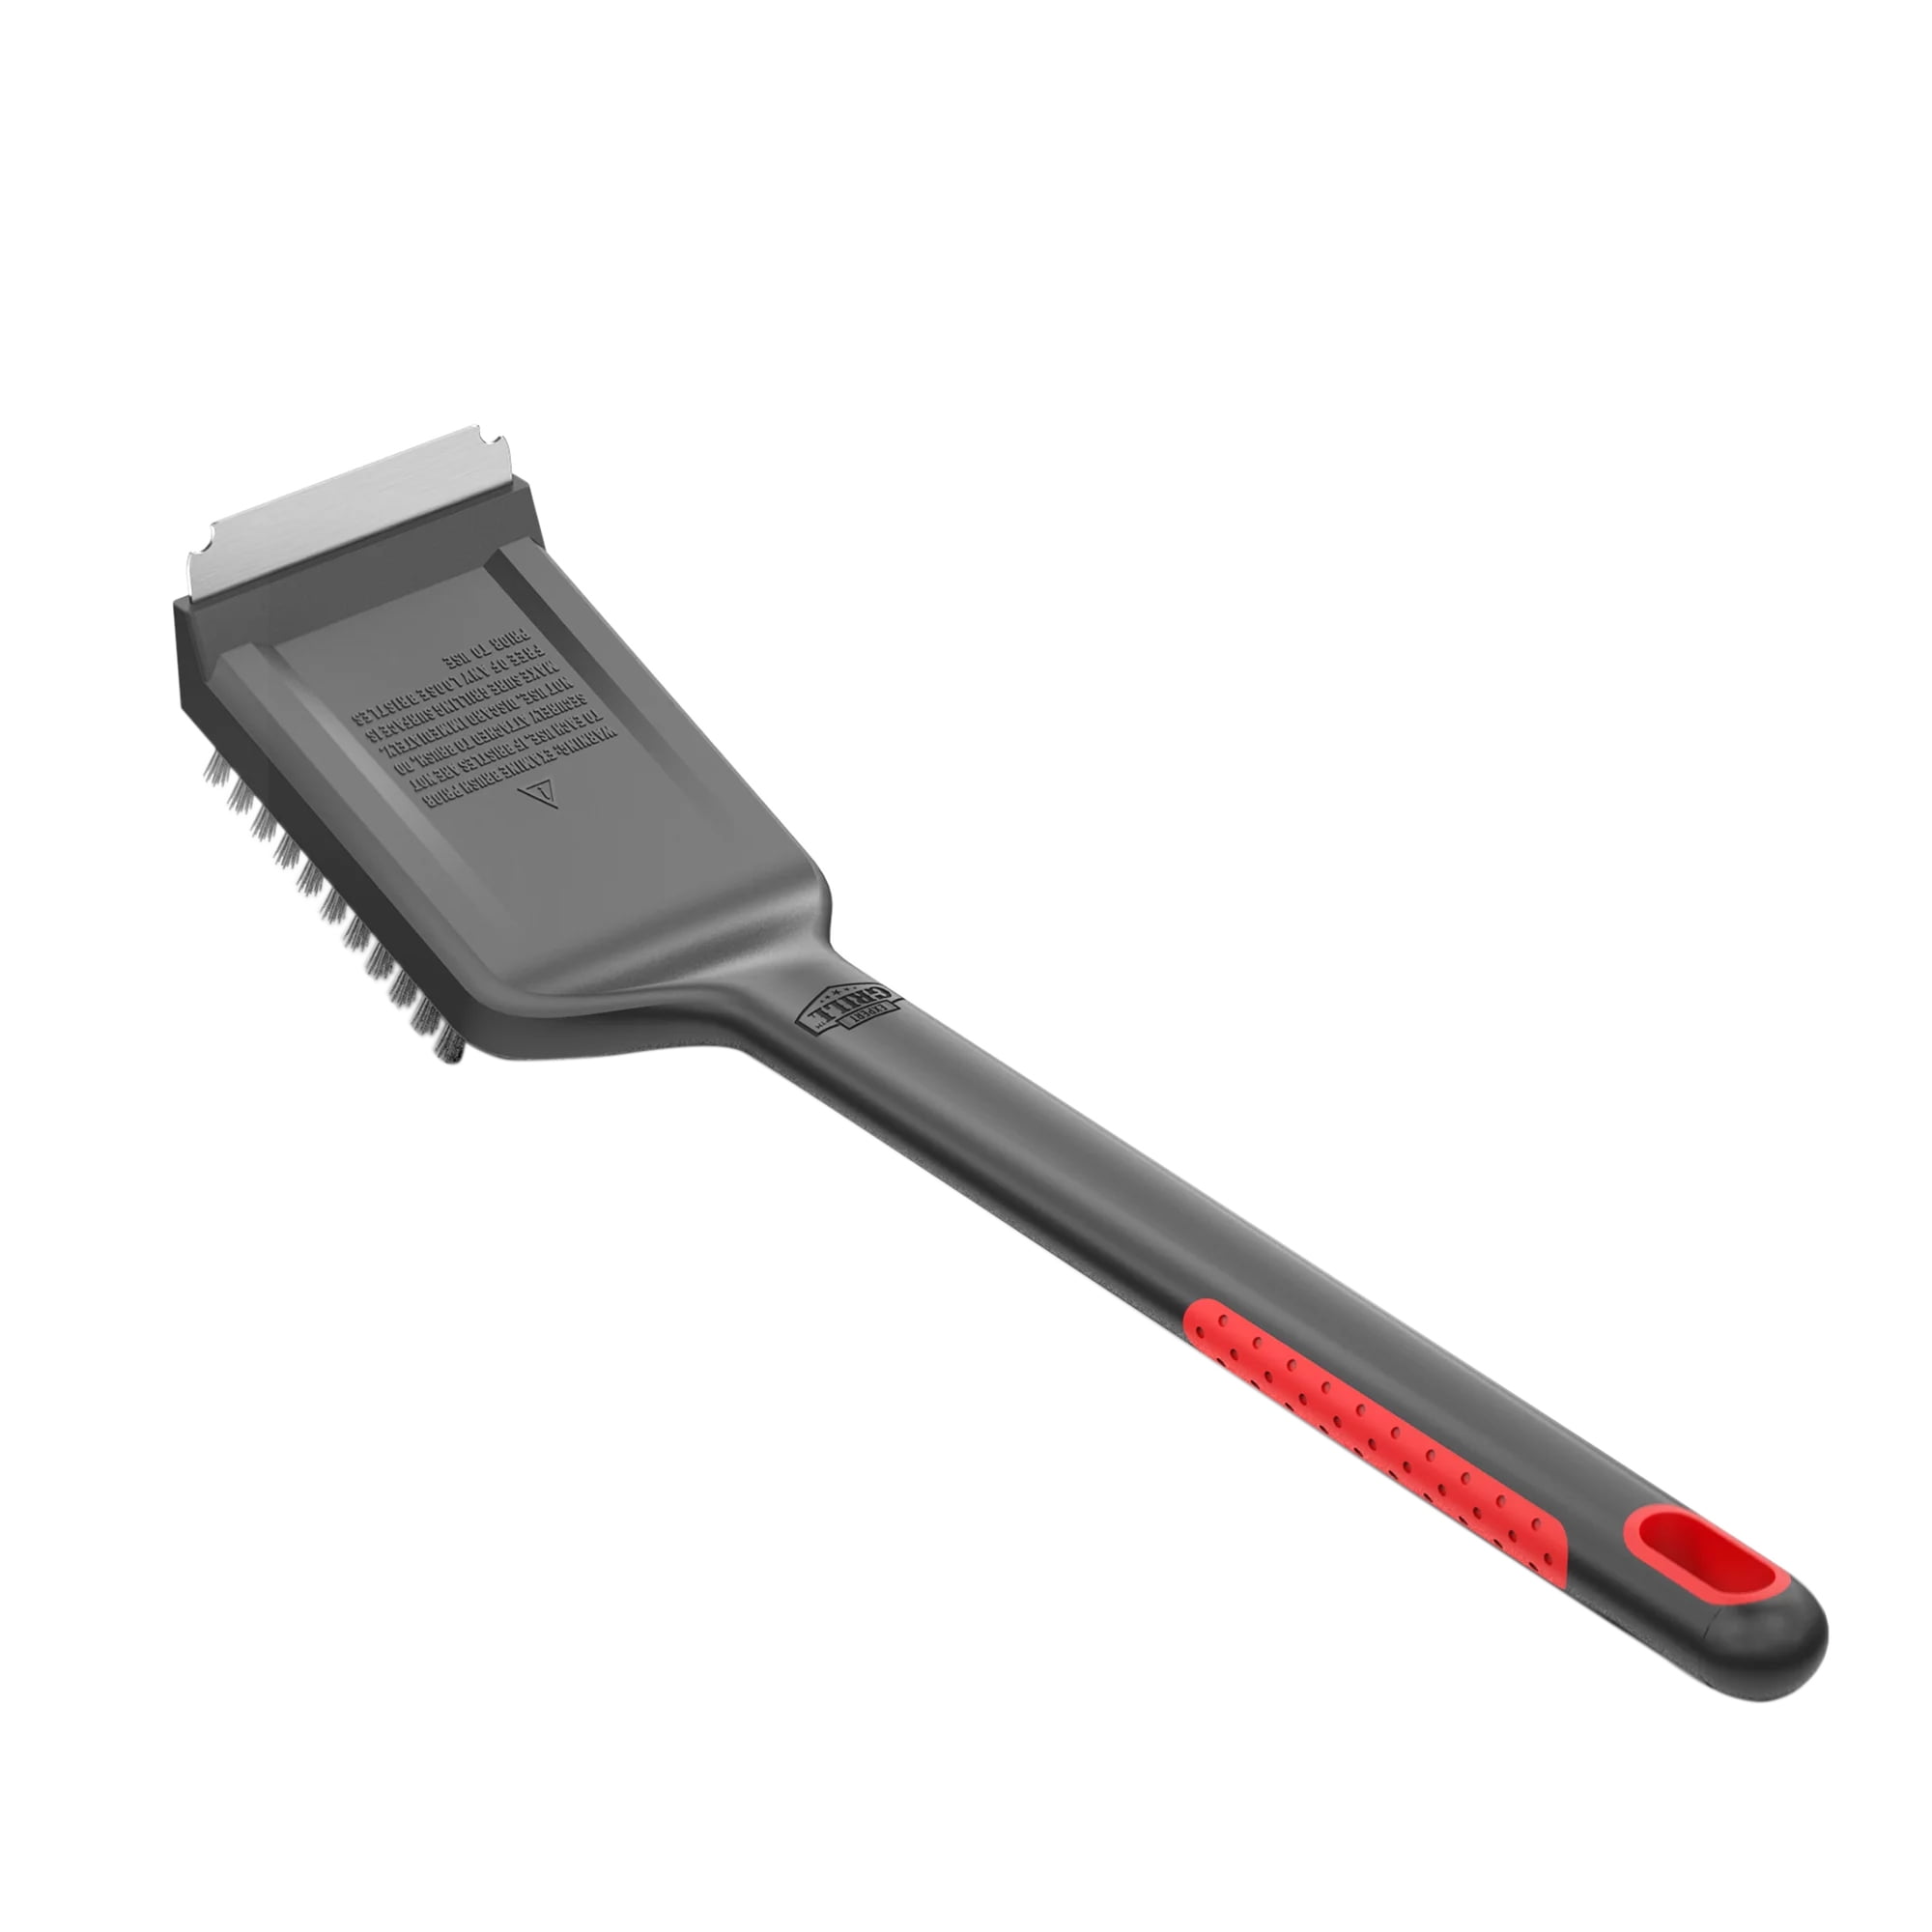  Lanpuly Wood Grill Scraper, BBQ Grill Brush with Long